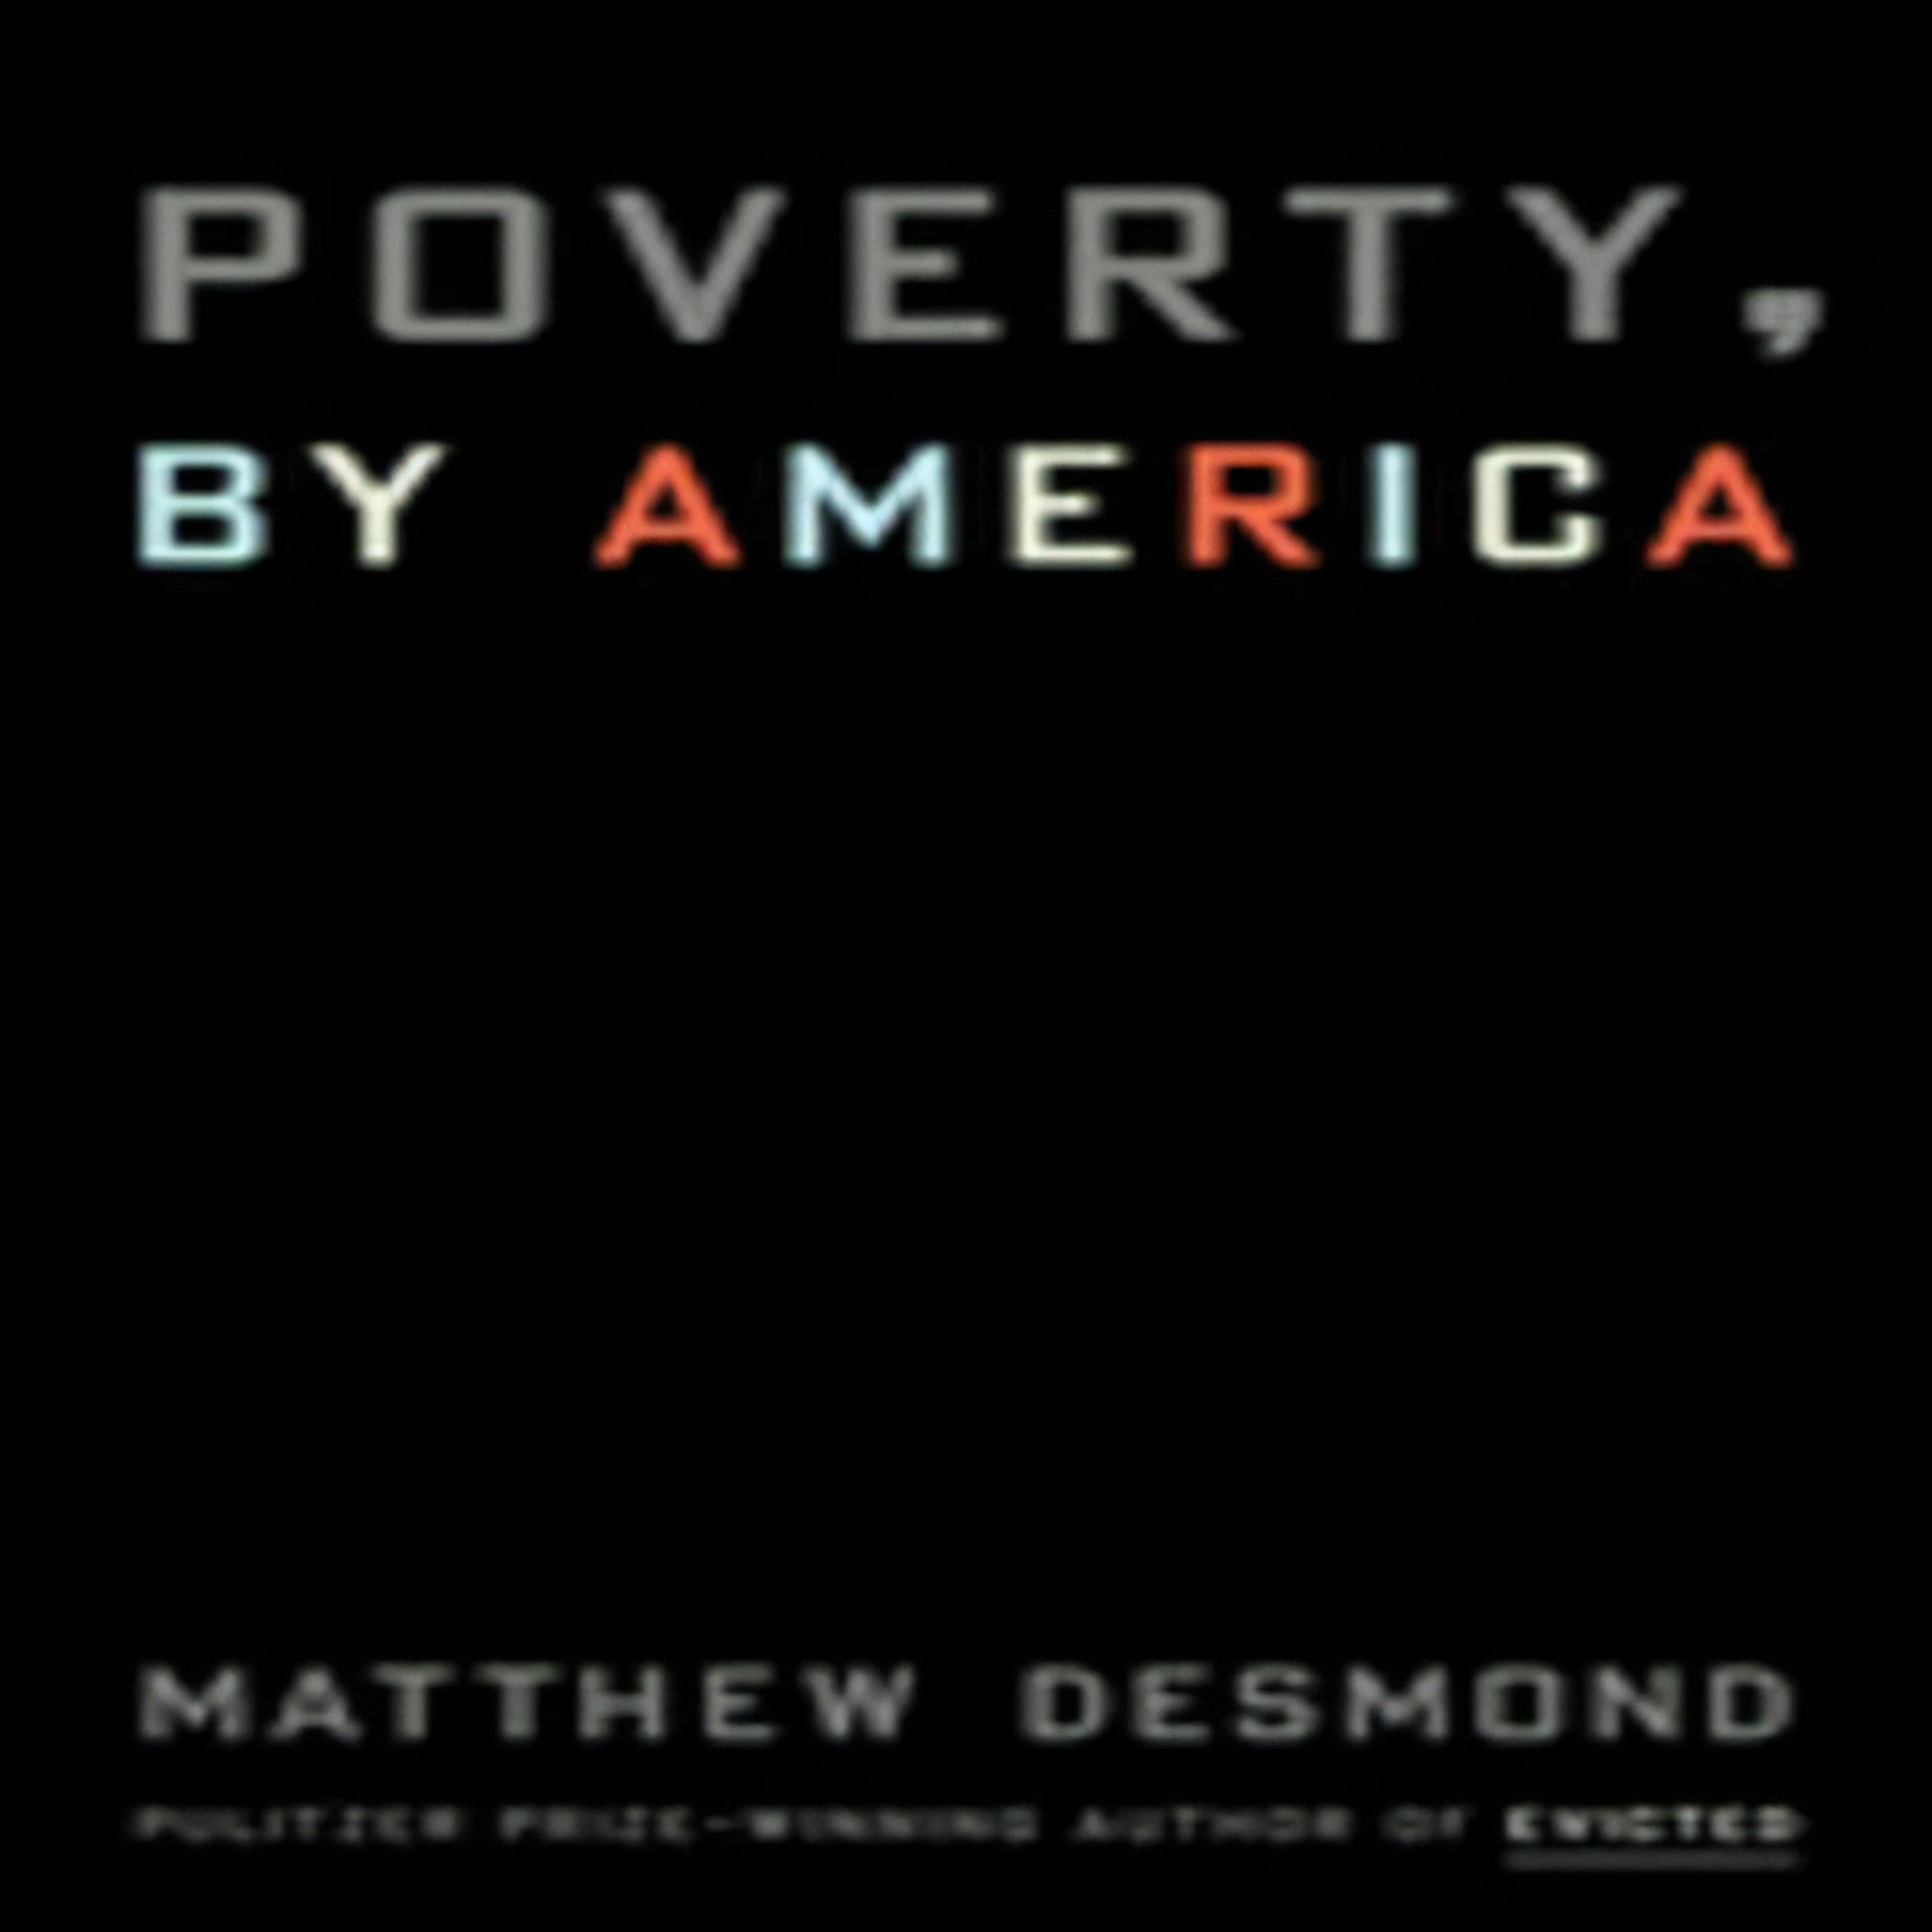 Poverty, by America - Street Smart211-031423-0593239911DPGBOOKSTORE.COM. Today's Bestsellers.